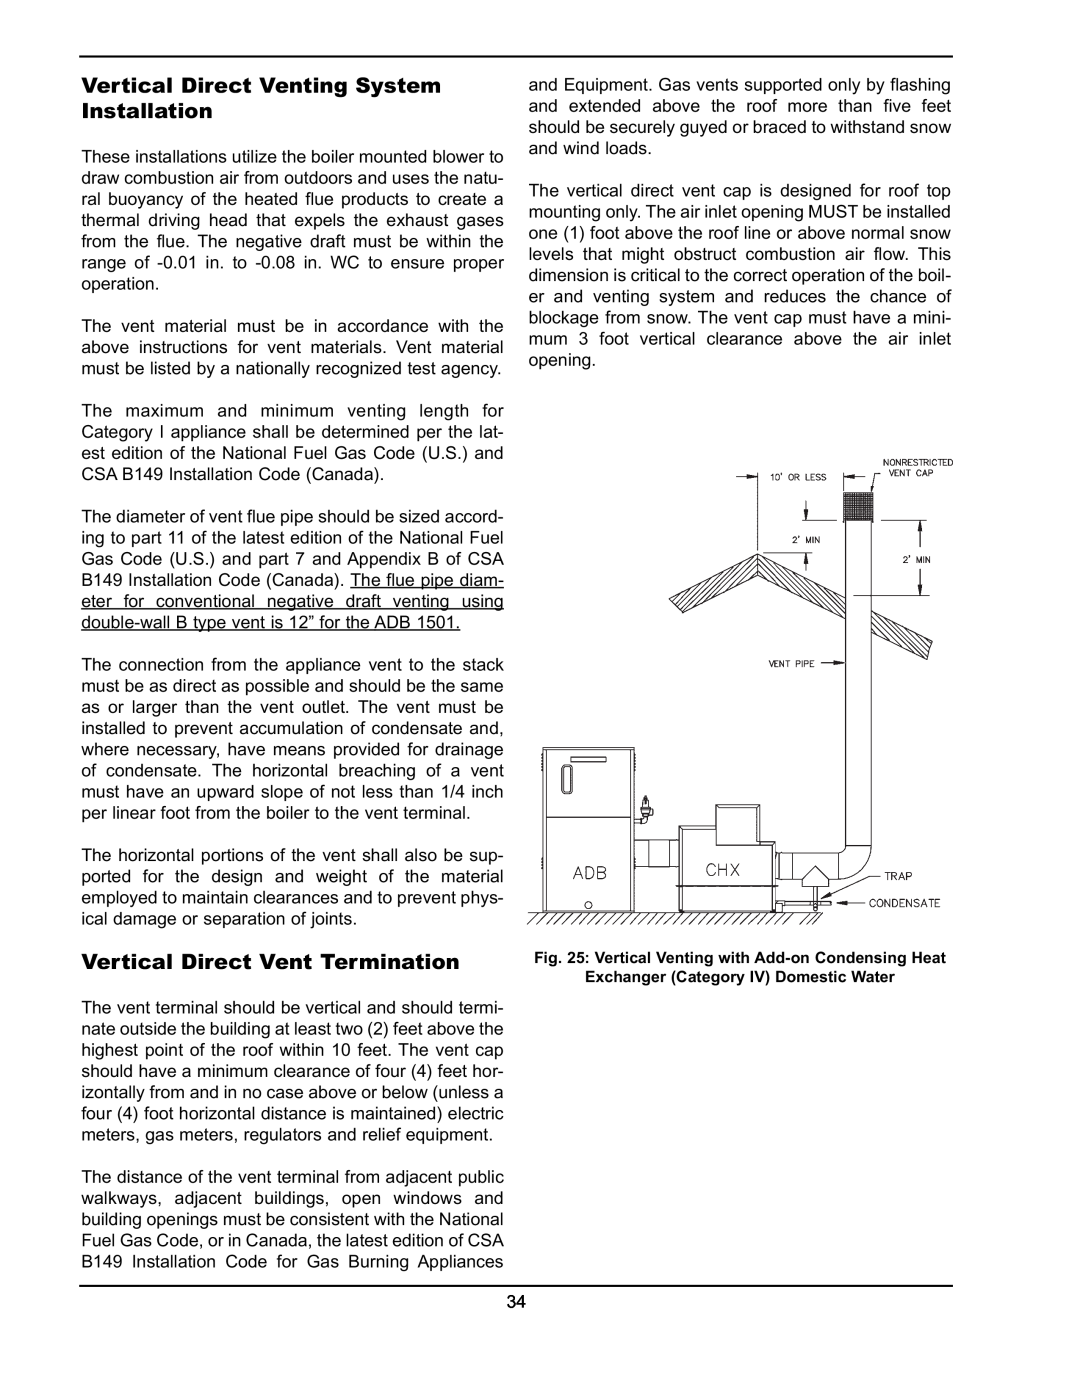 Raypak 751 manual Vertical Direct Venting System Installation, Vertical Direct Vent Termination 